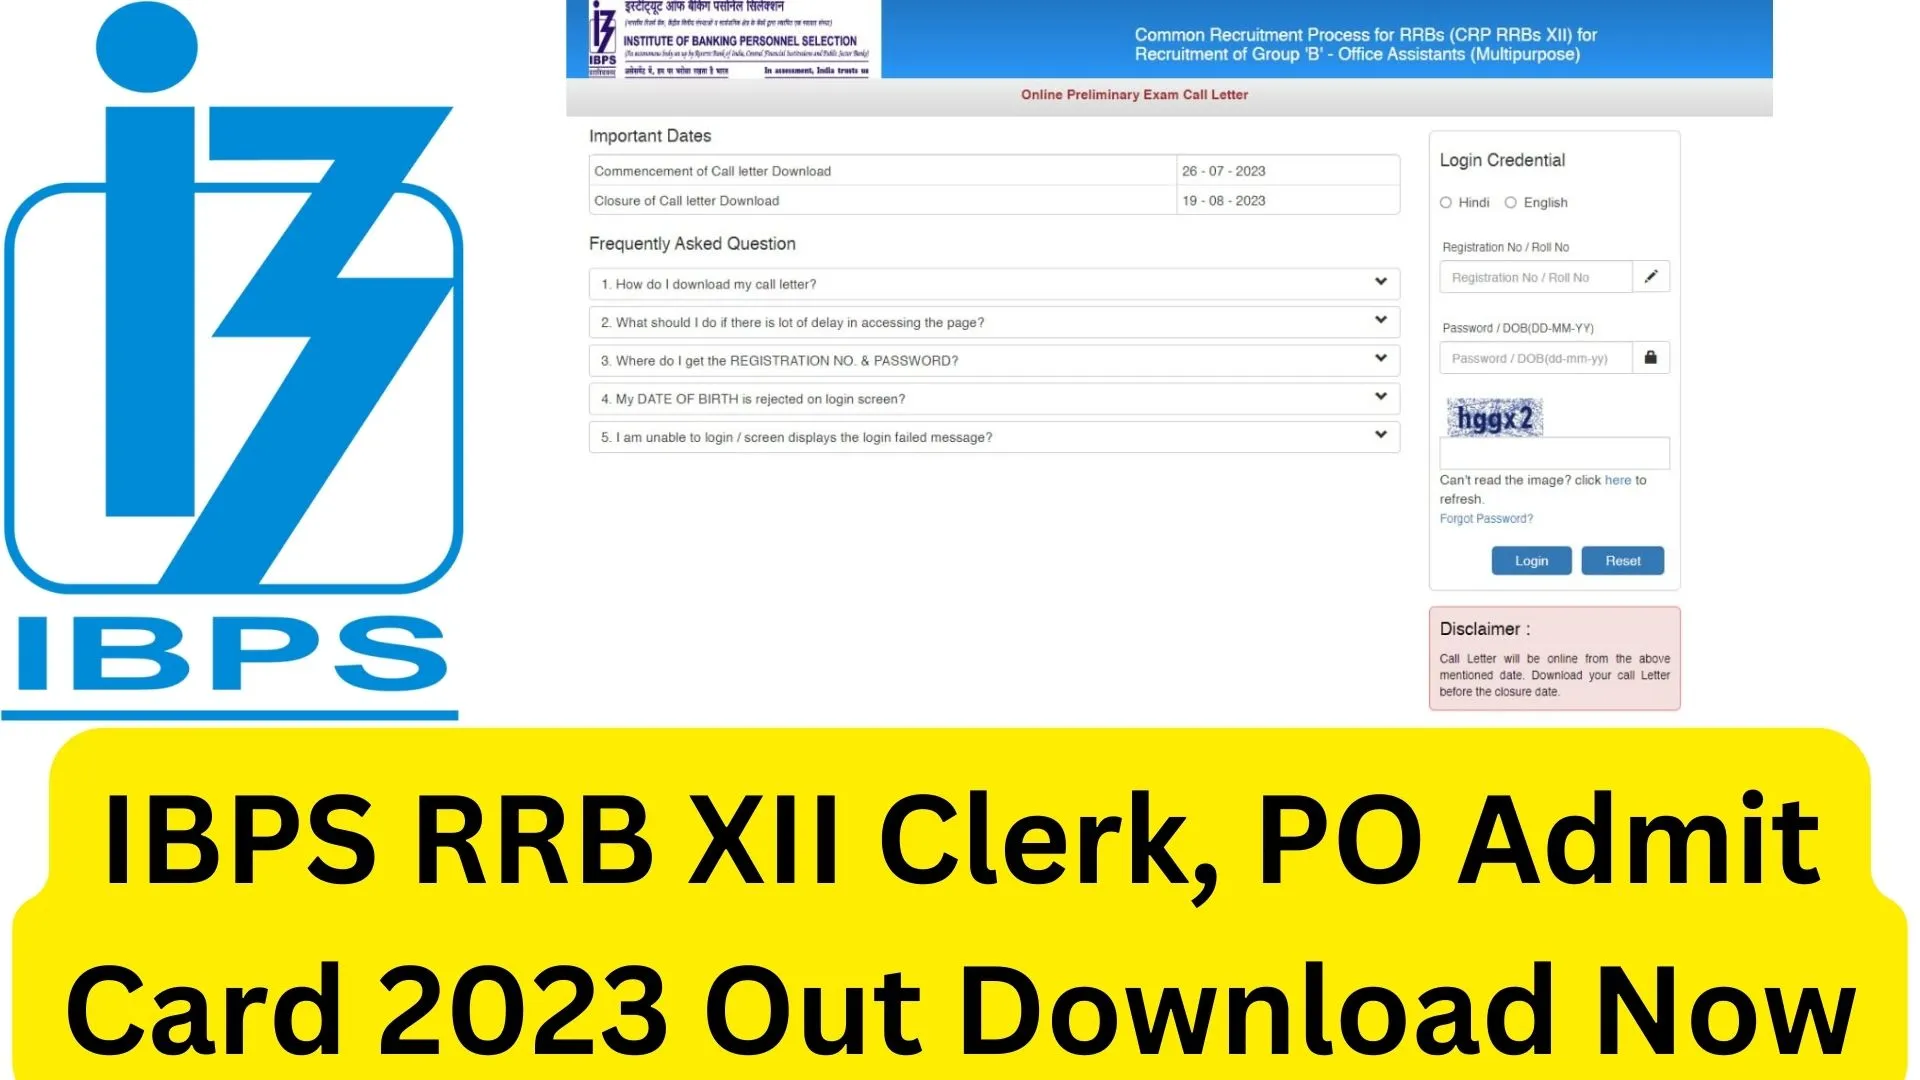 IBPS RRB XII Clerk PO Admit Card 2023 IBPS RRB XII Clerk PO Admit Card 2023 - Download Now